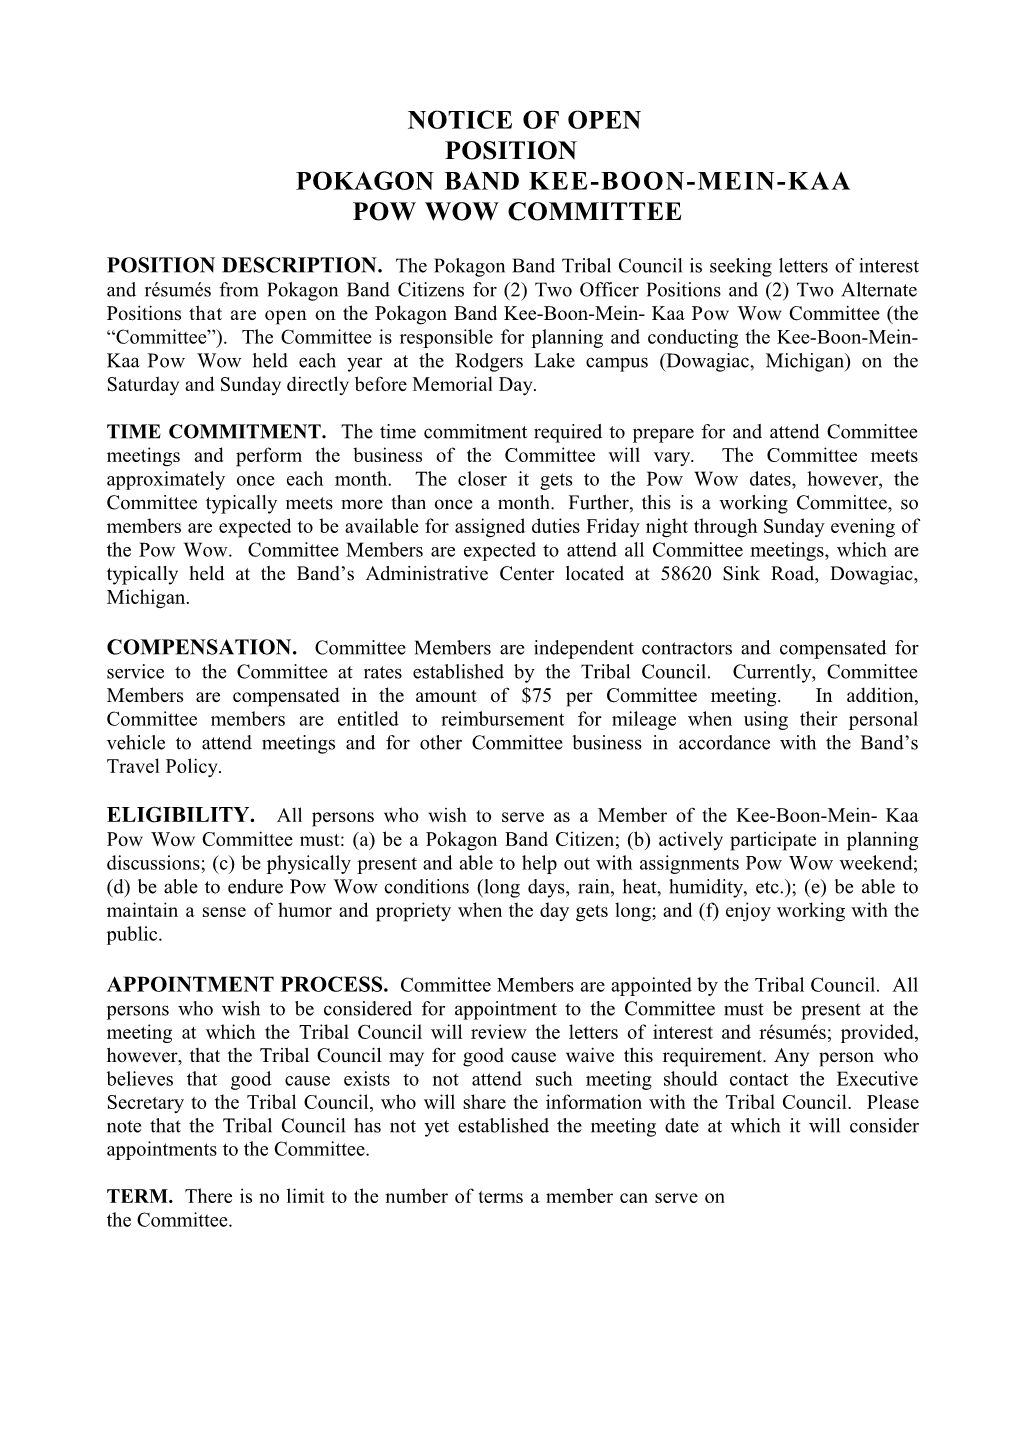 Notice of Open KBMK Pow Wow Committee Position 040615